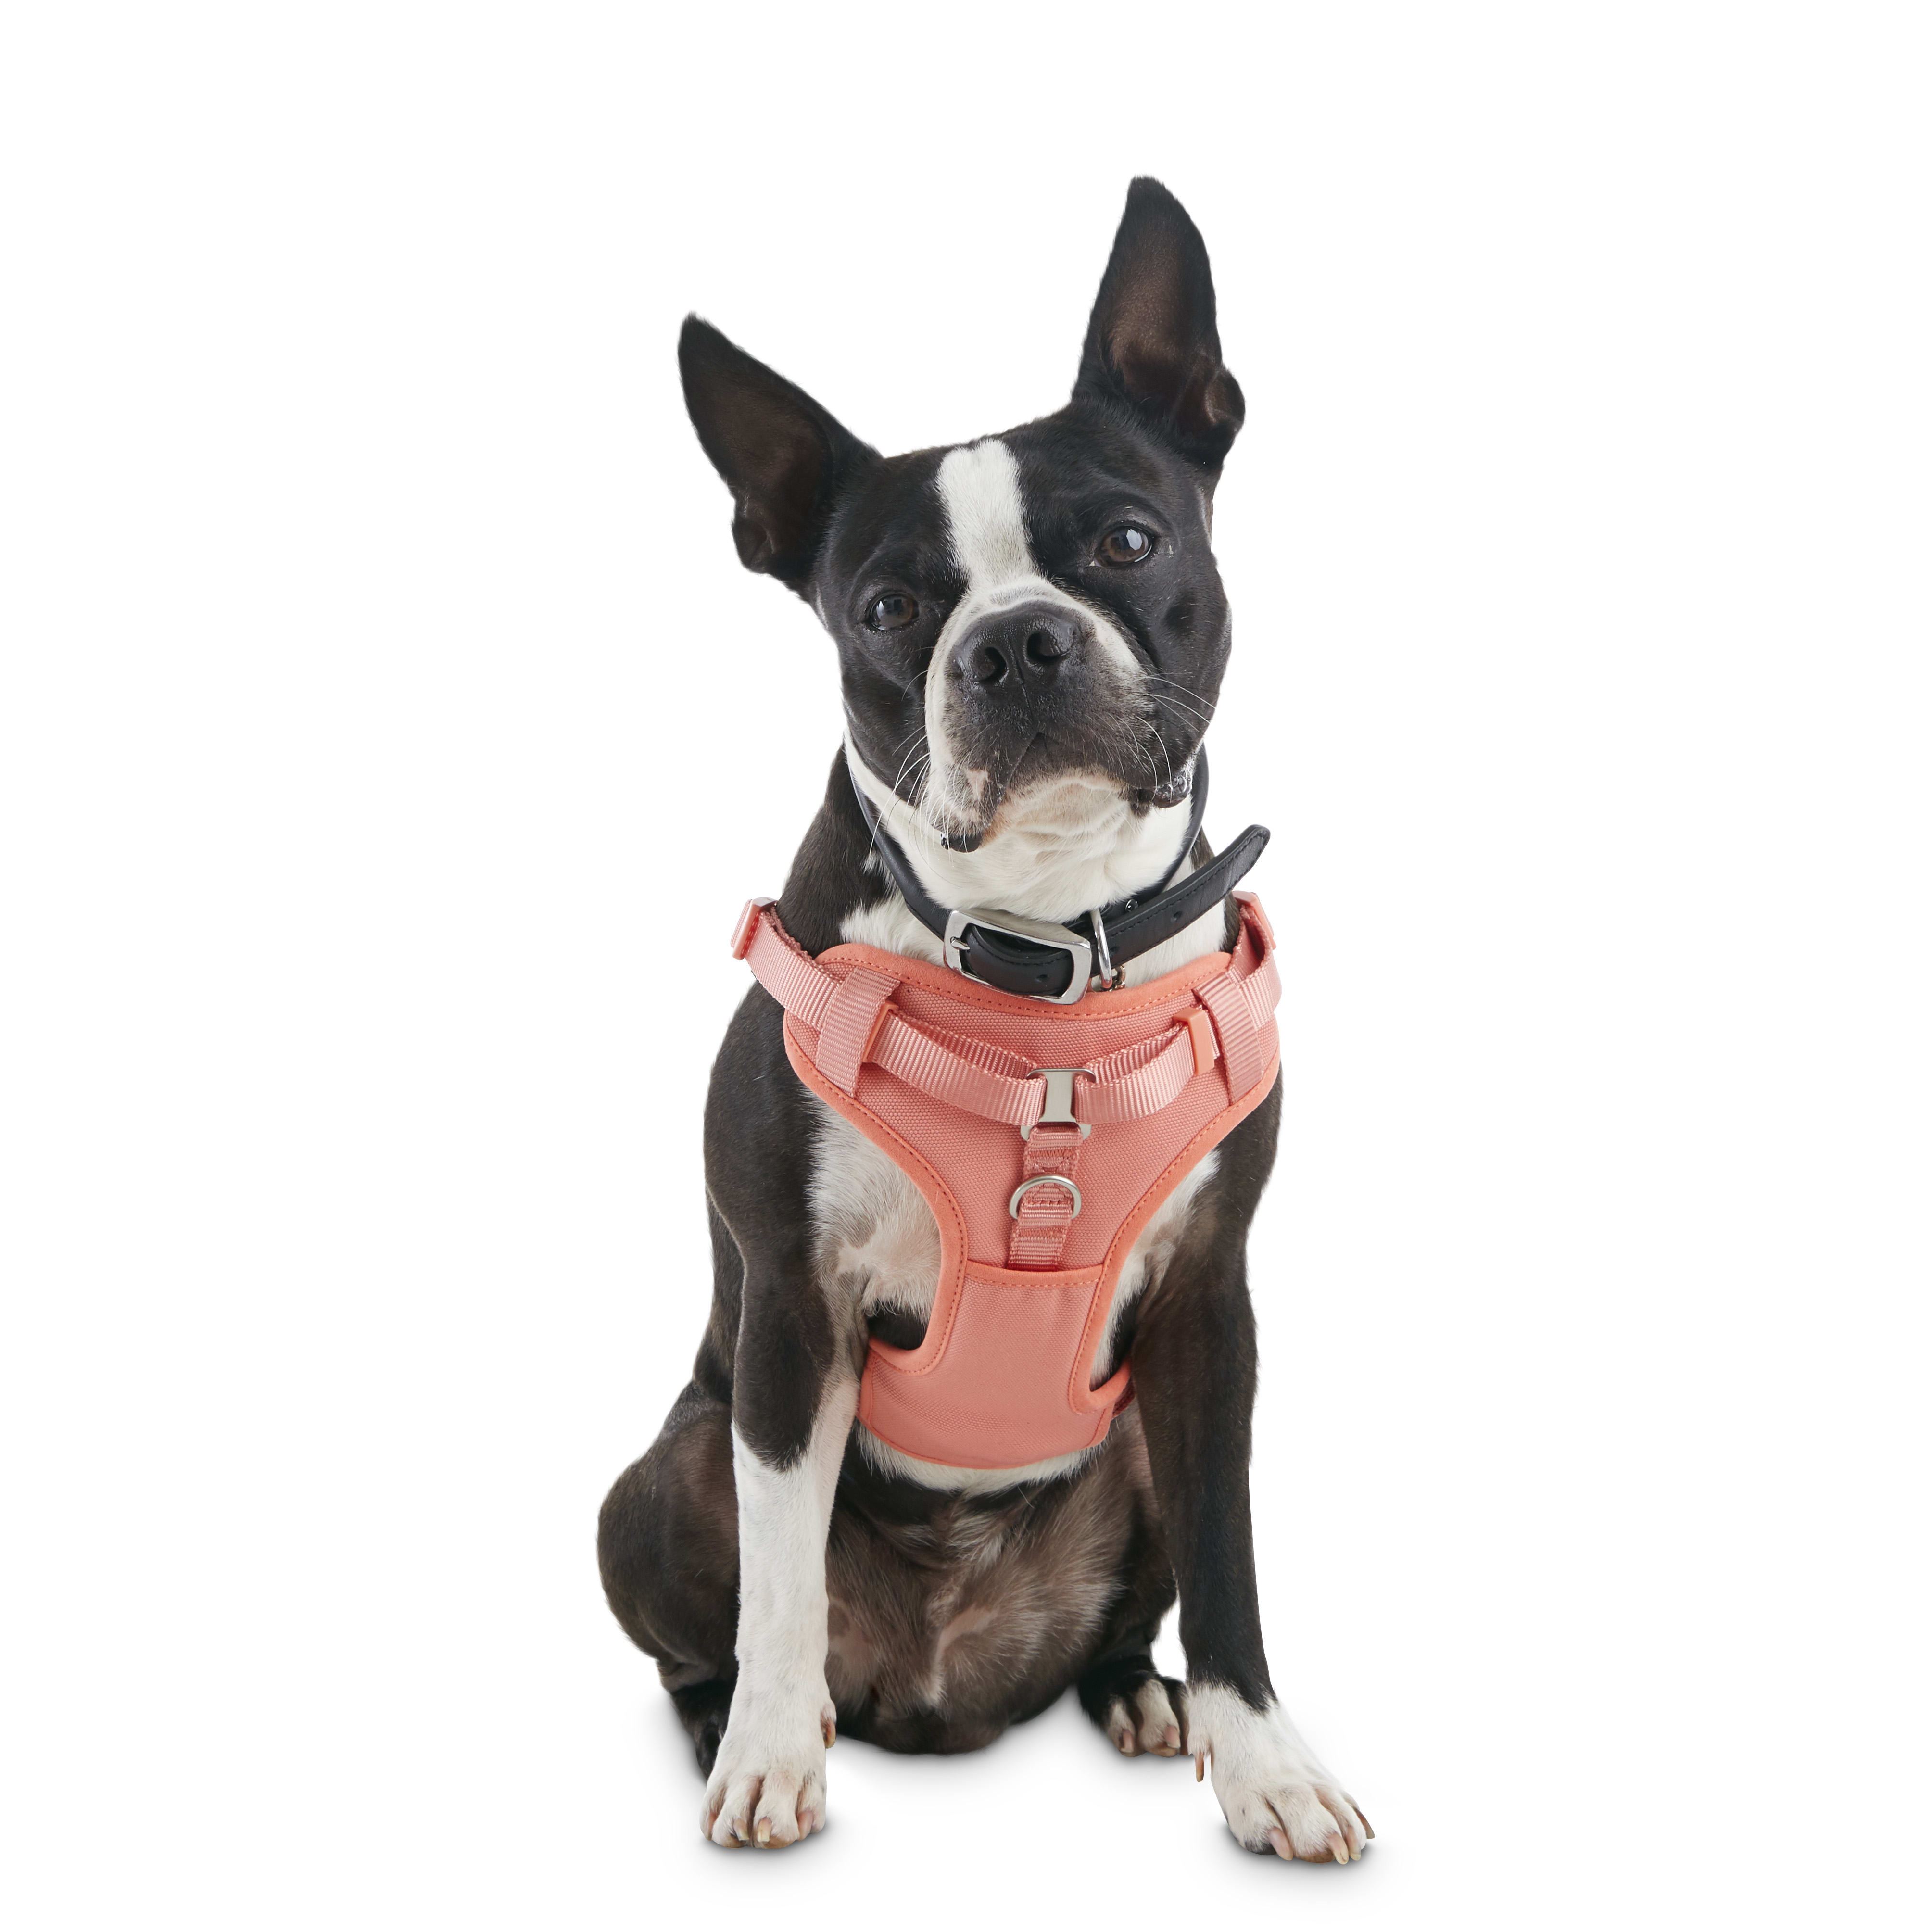 Double G Quilted Harness & Leash